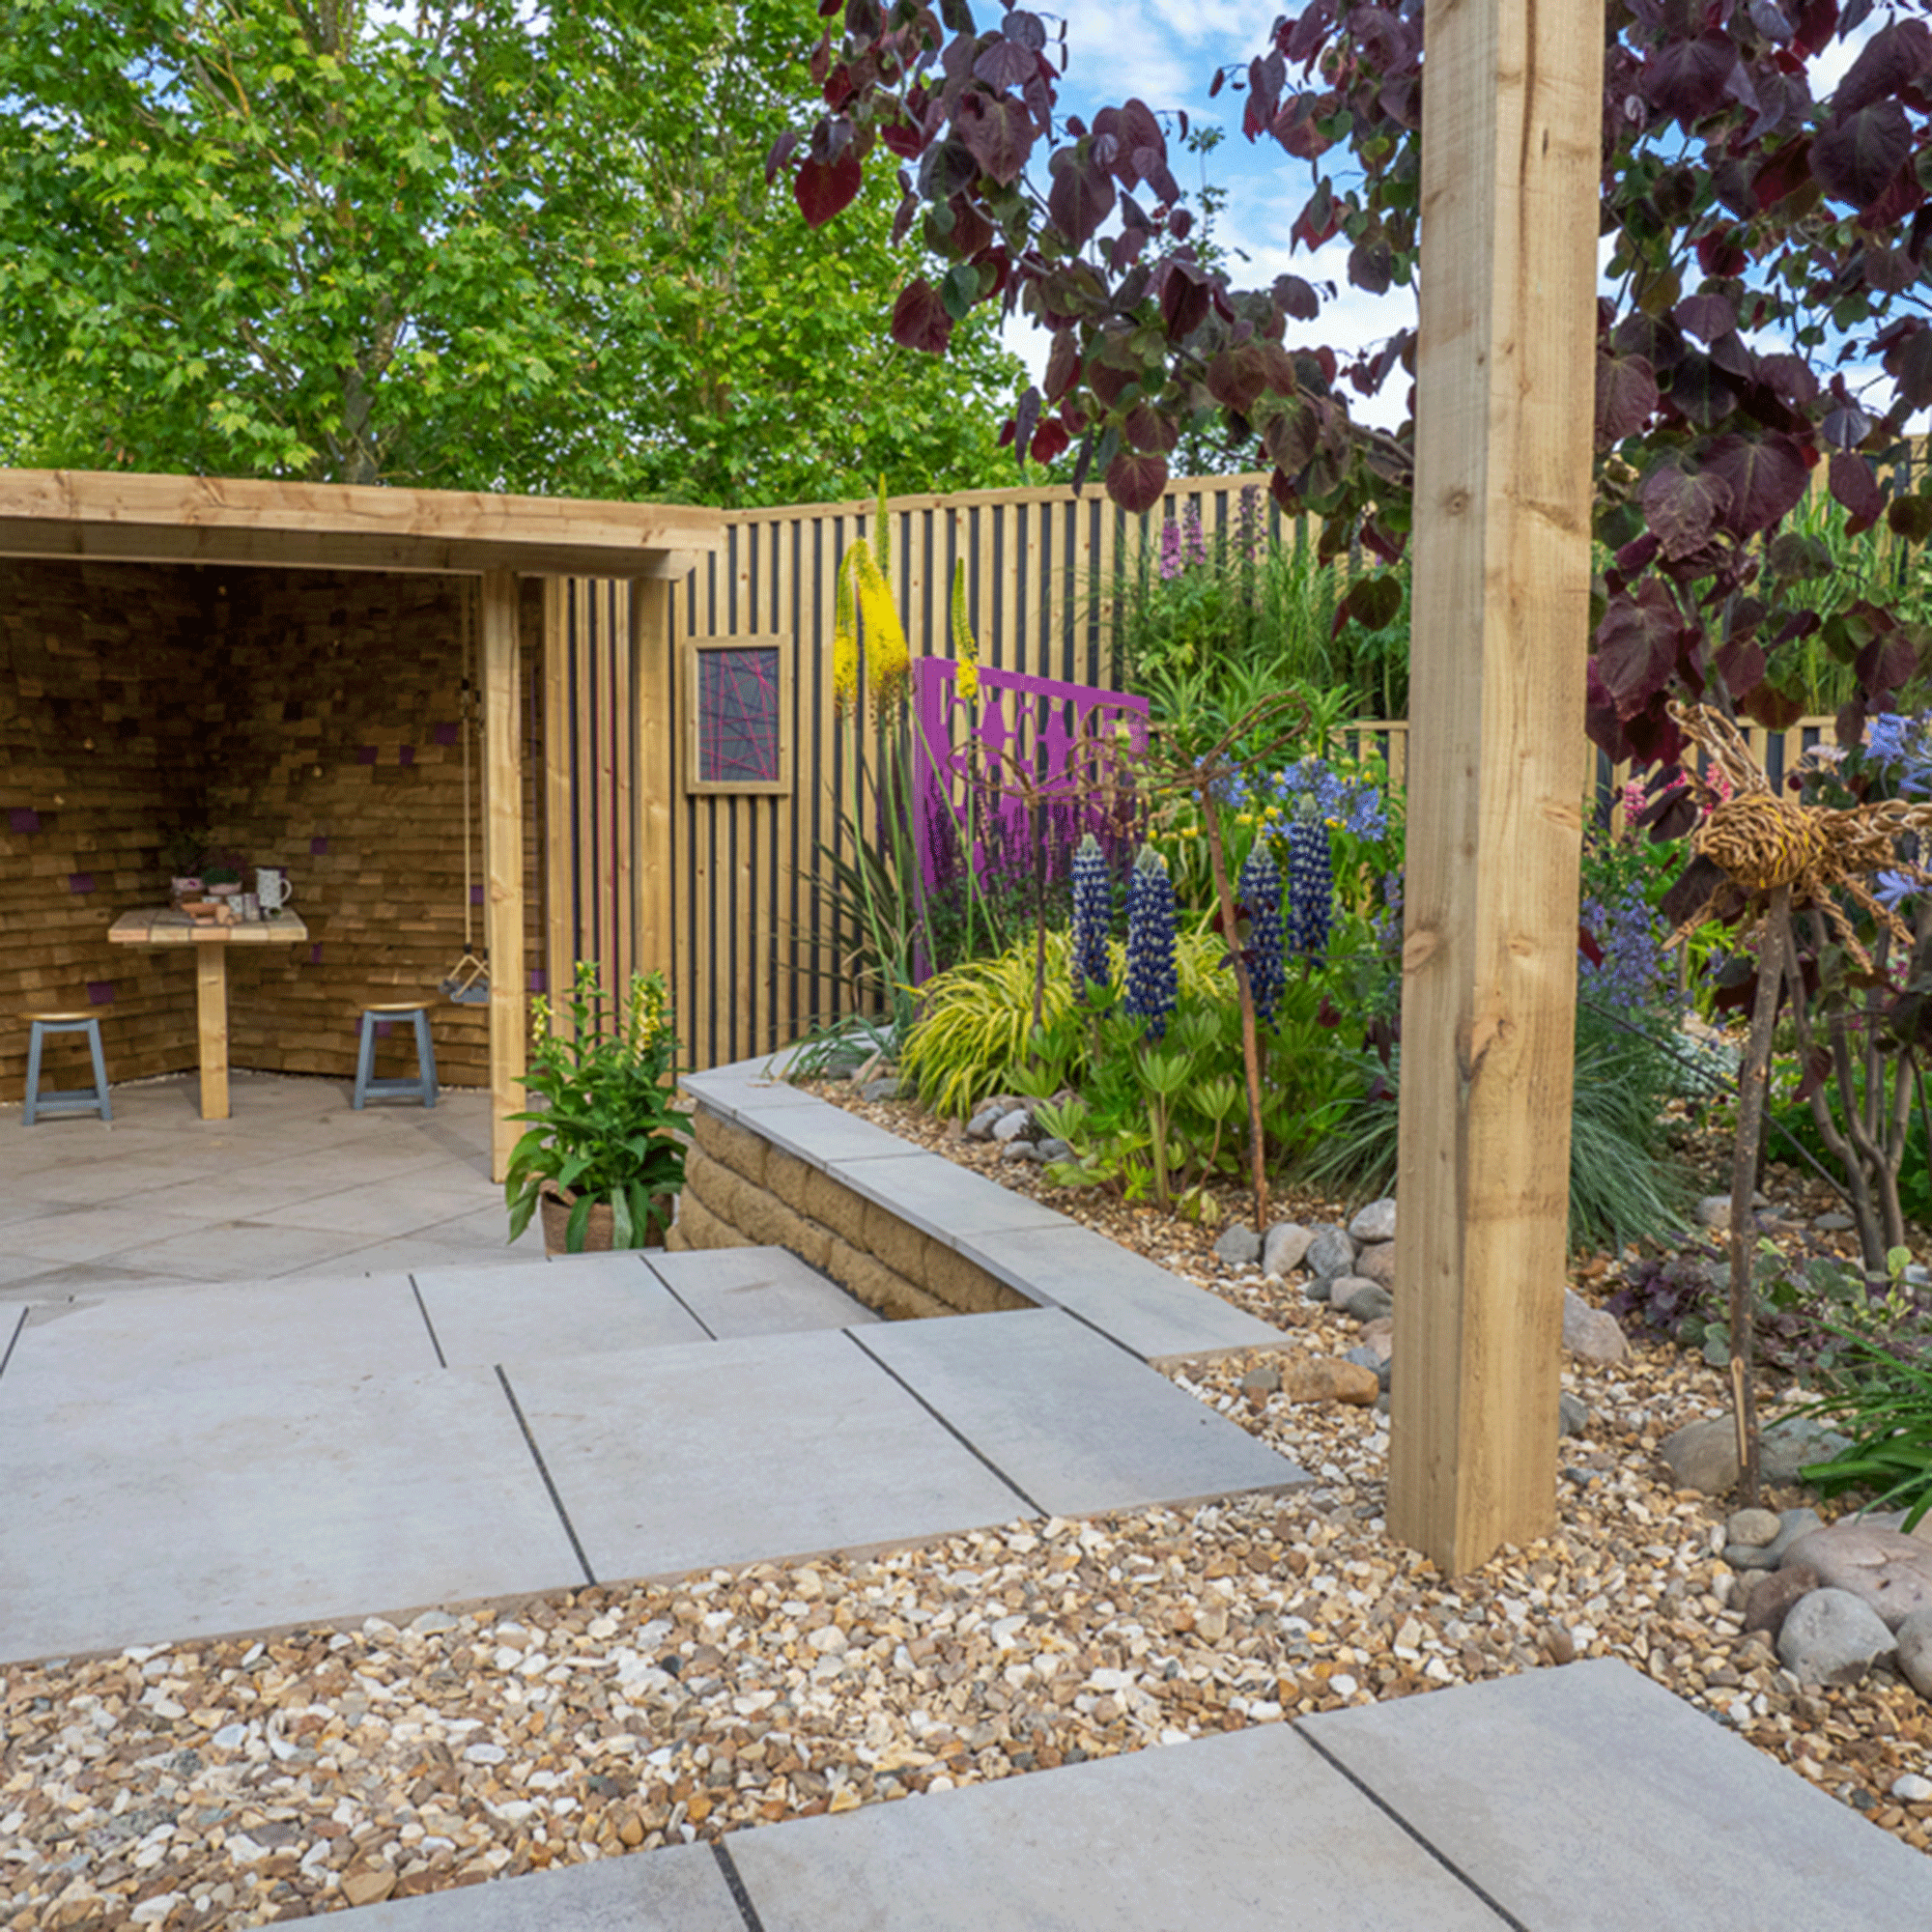 Drought tolerant planting with gravel and shelter